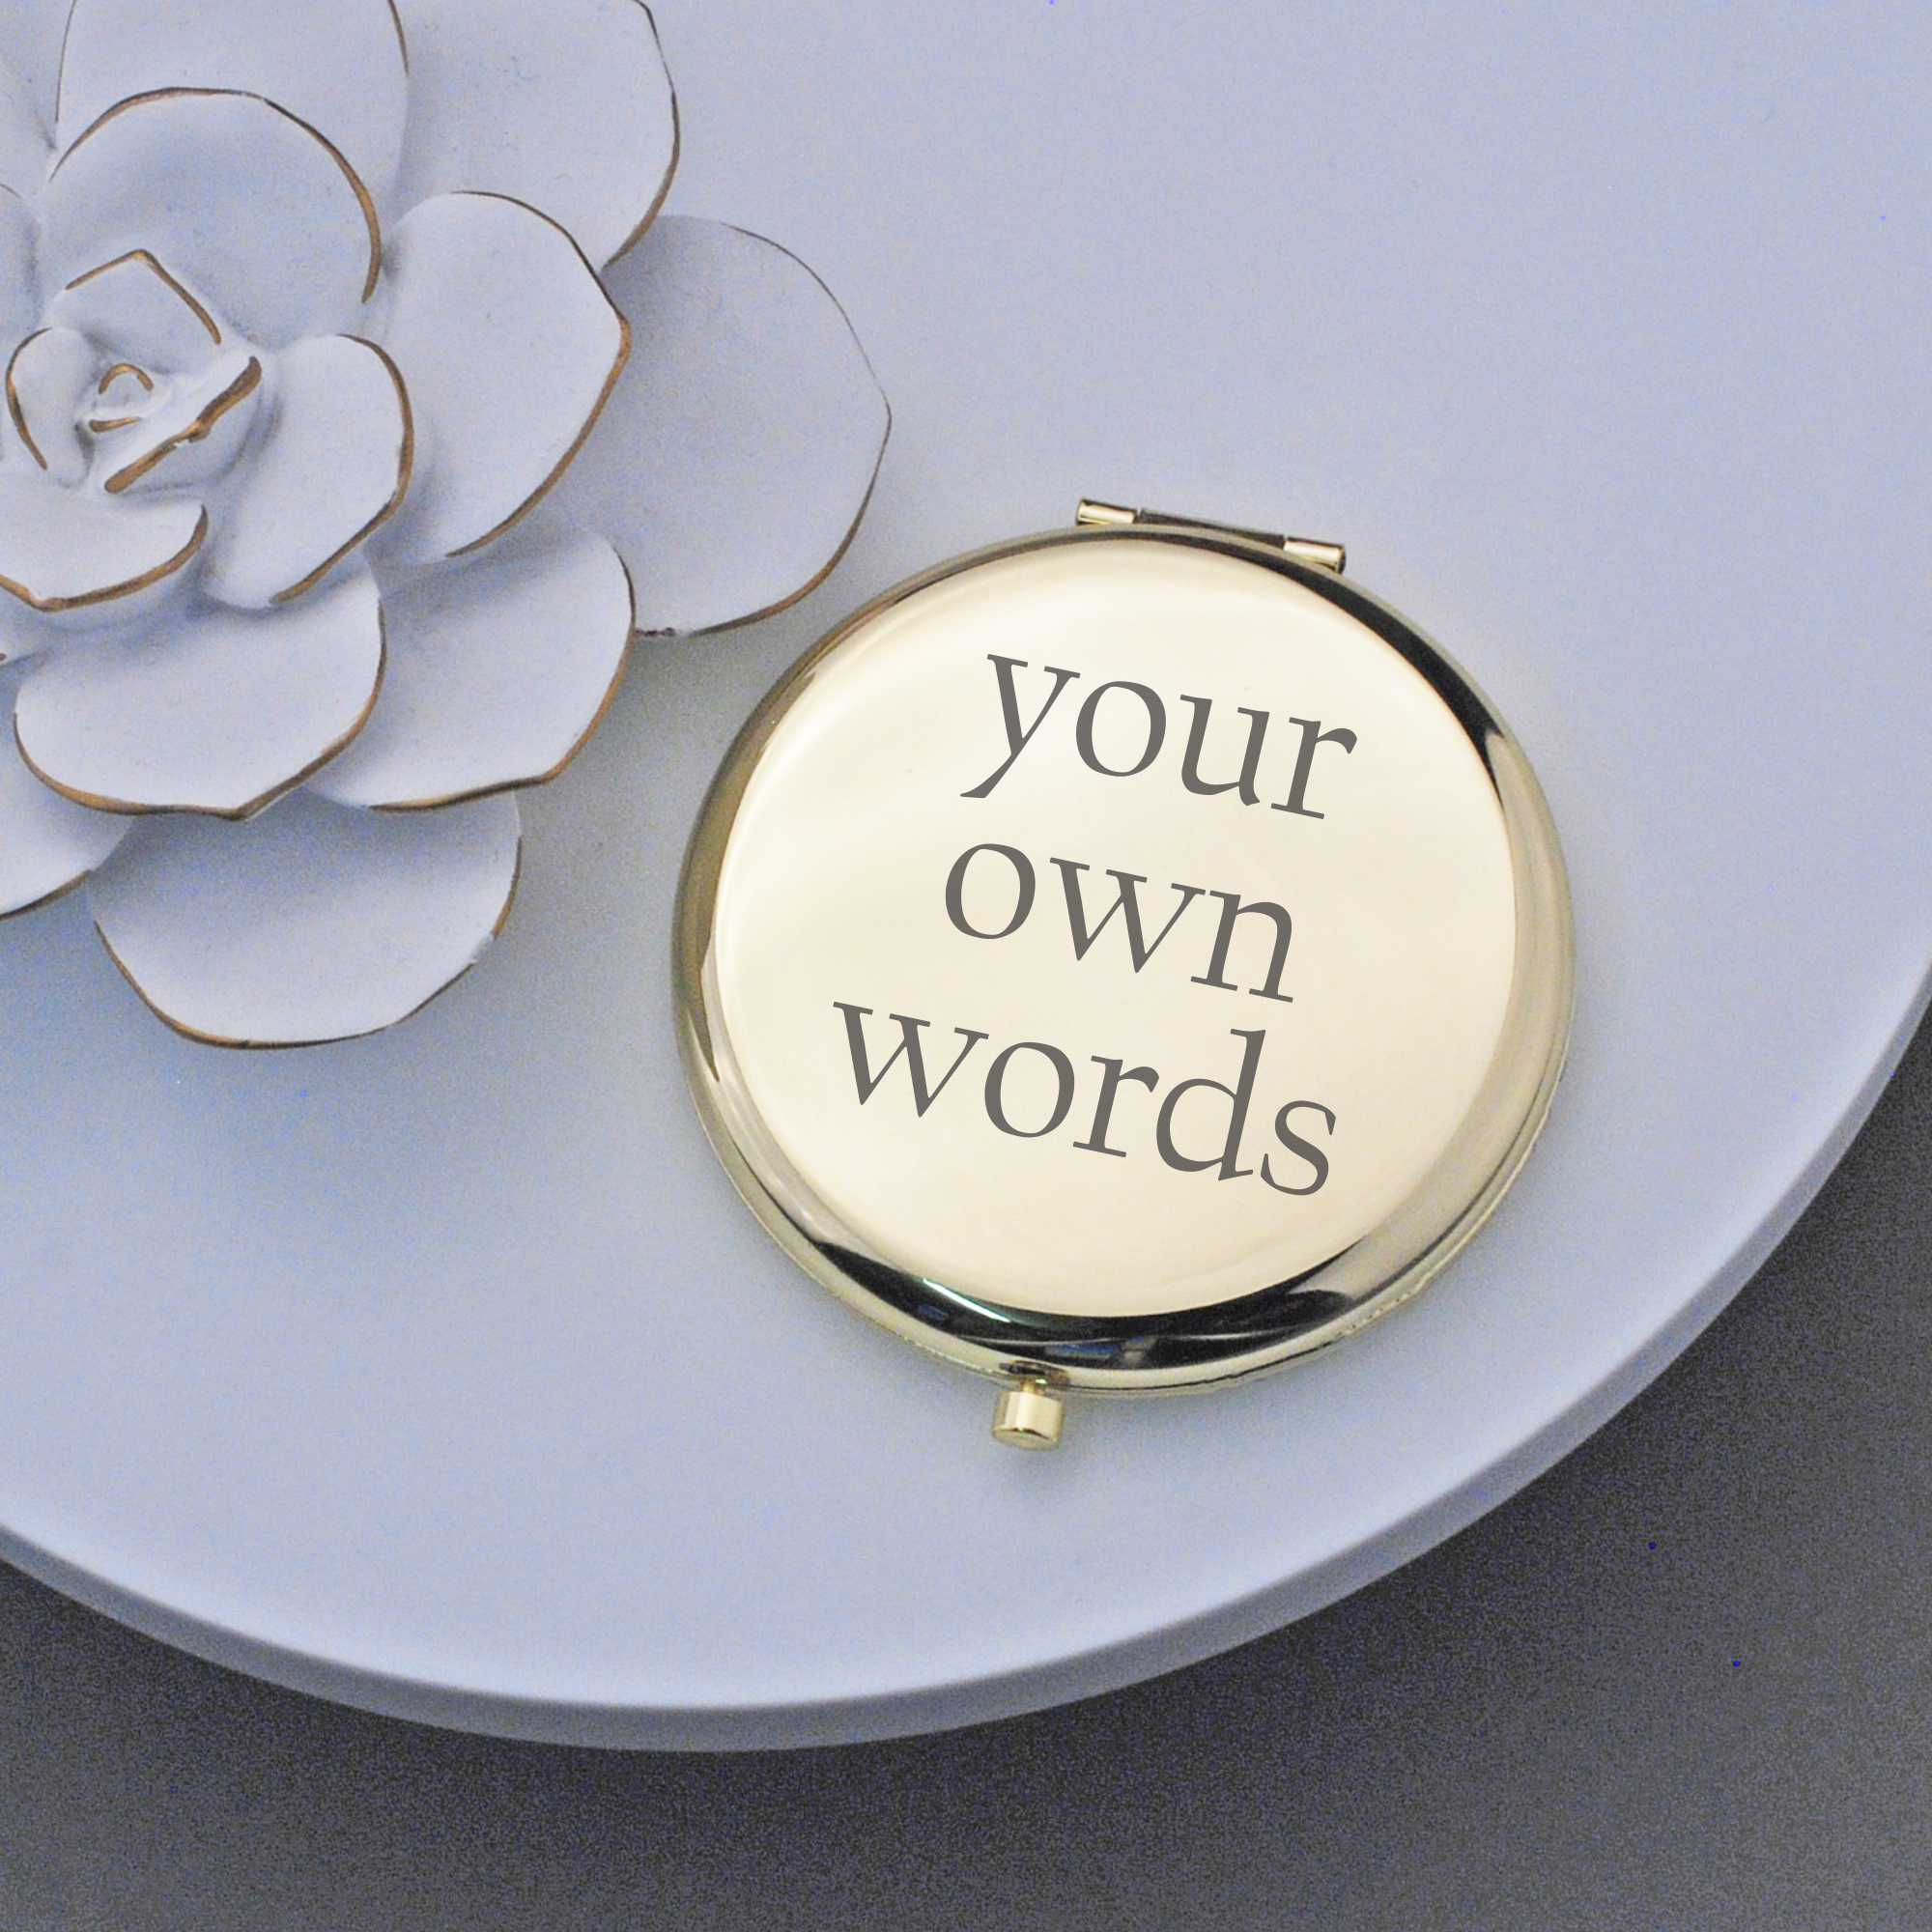 Compact Mirror Engraved with Your Own Words